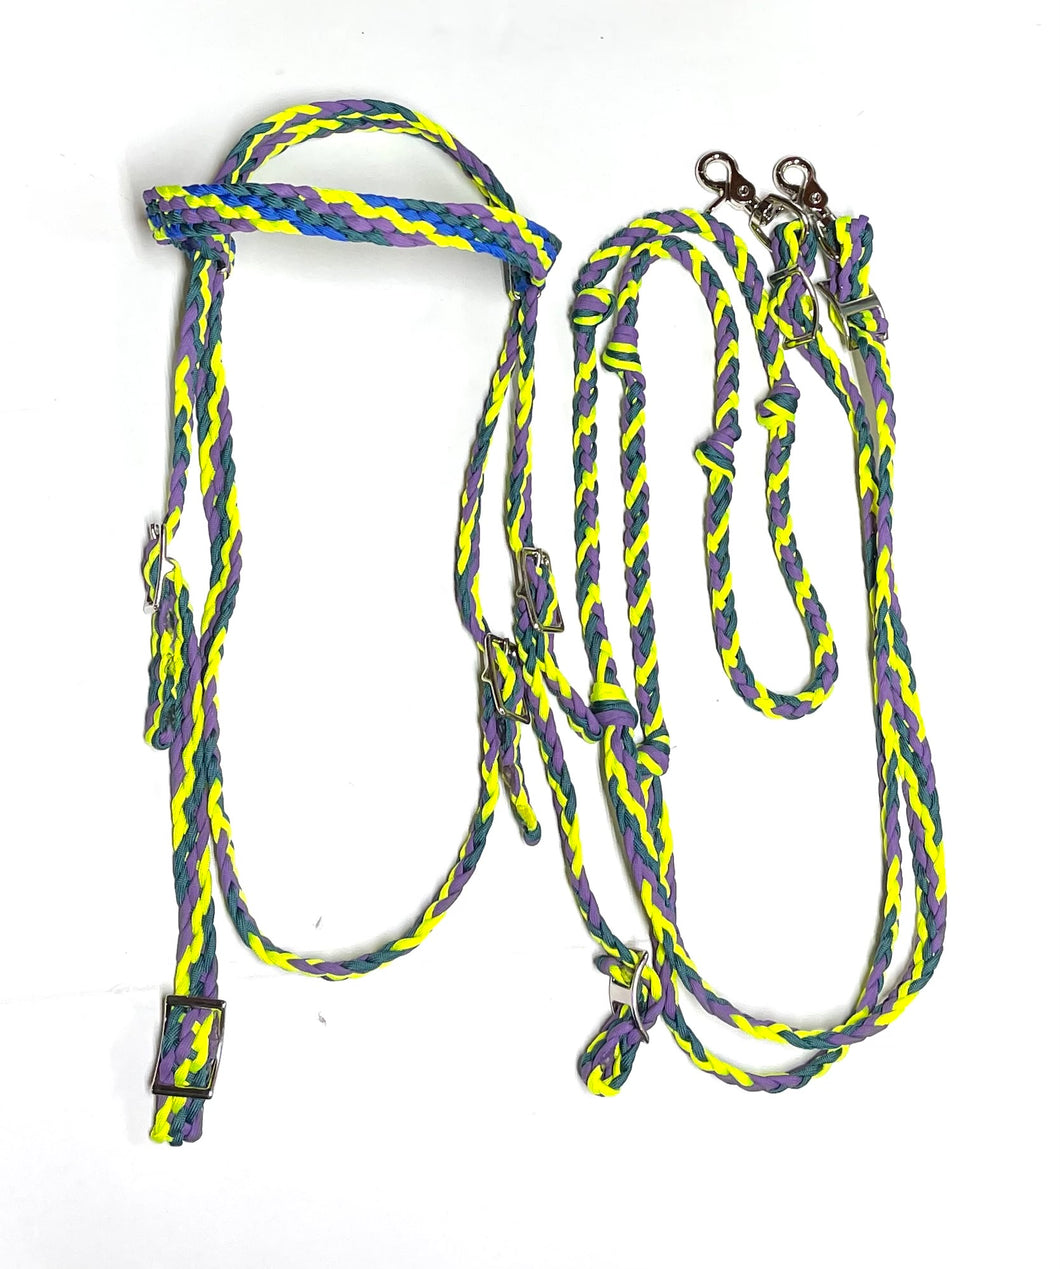 SALE barrel reins with  grip knots 8’ with matching bridle average horse